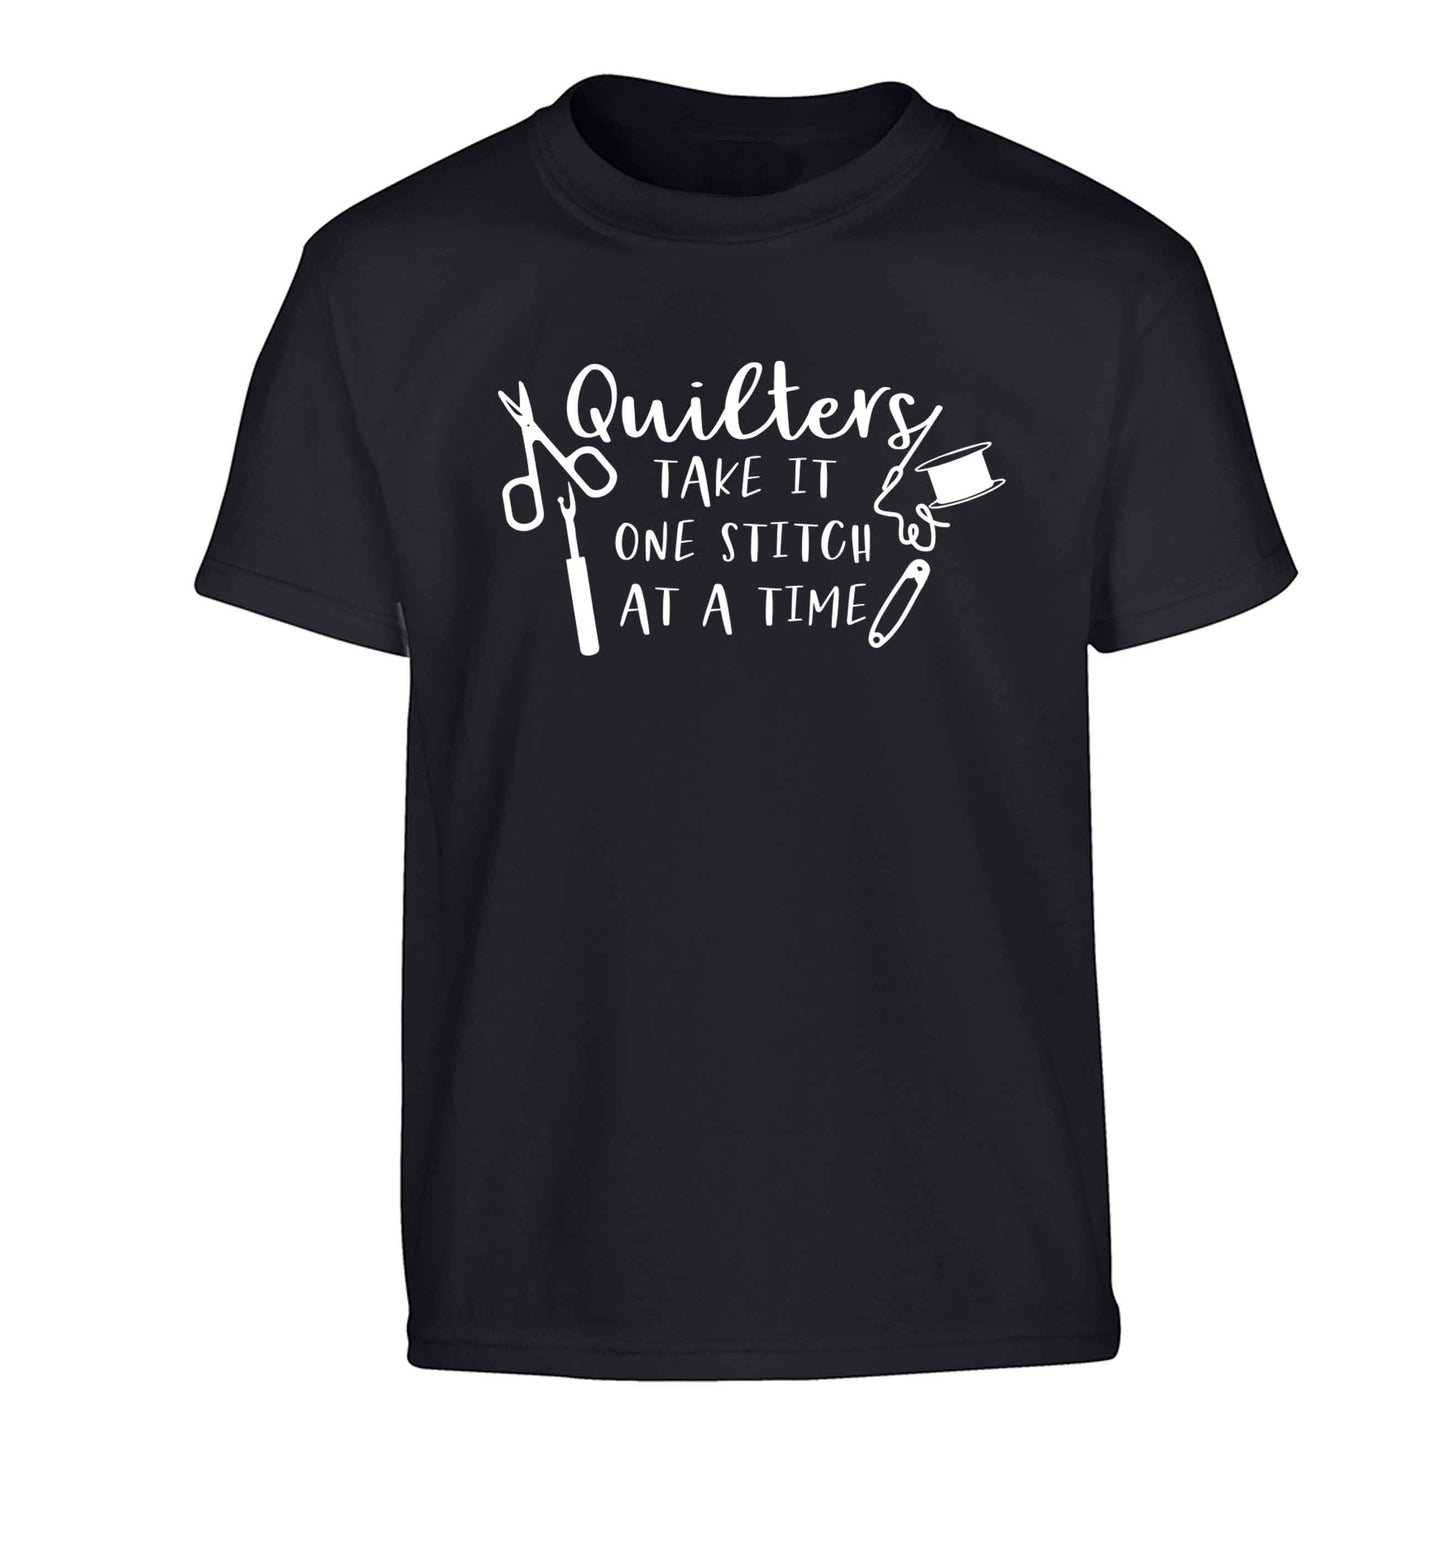 Quilters take it one stitch at a time  Children's black Tshirt 12-13 Years